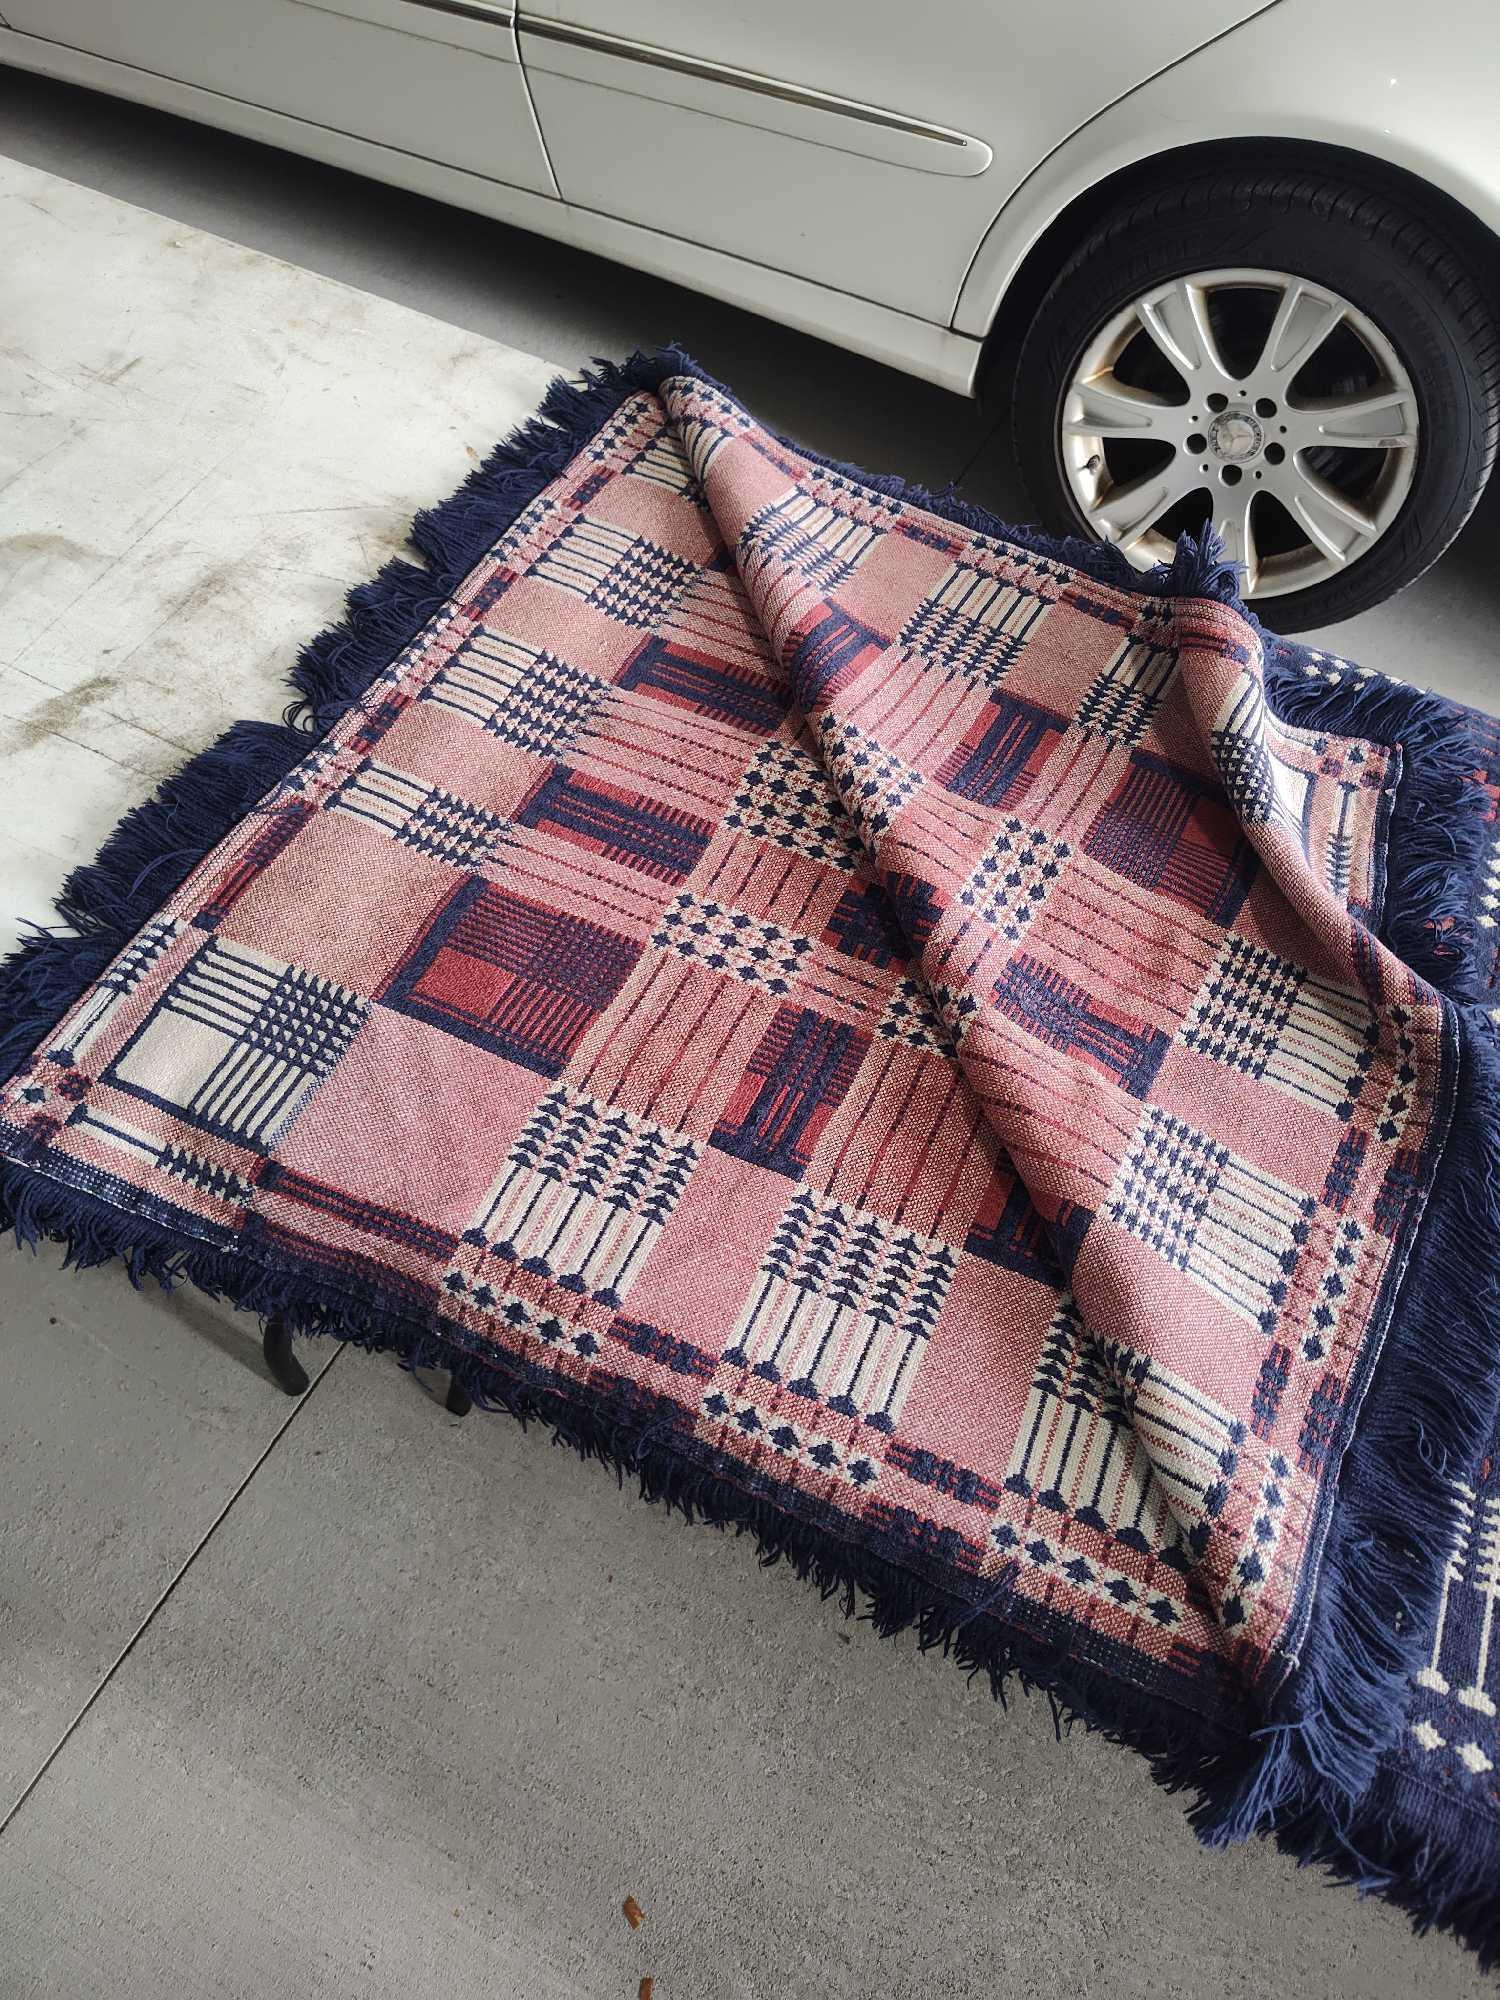 Large Coverlet Approximately 70" x 95"